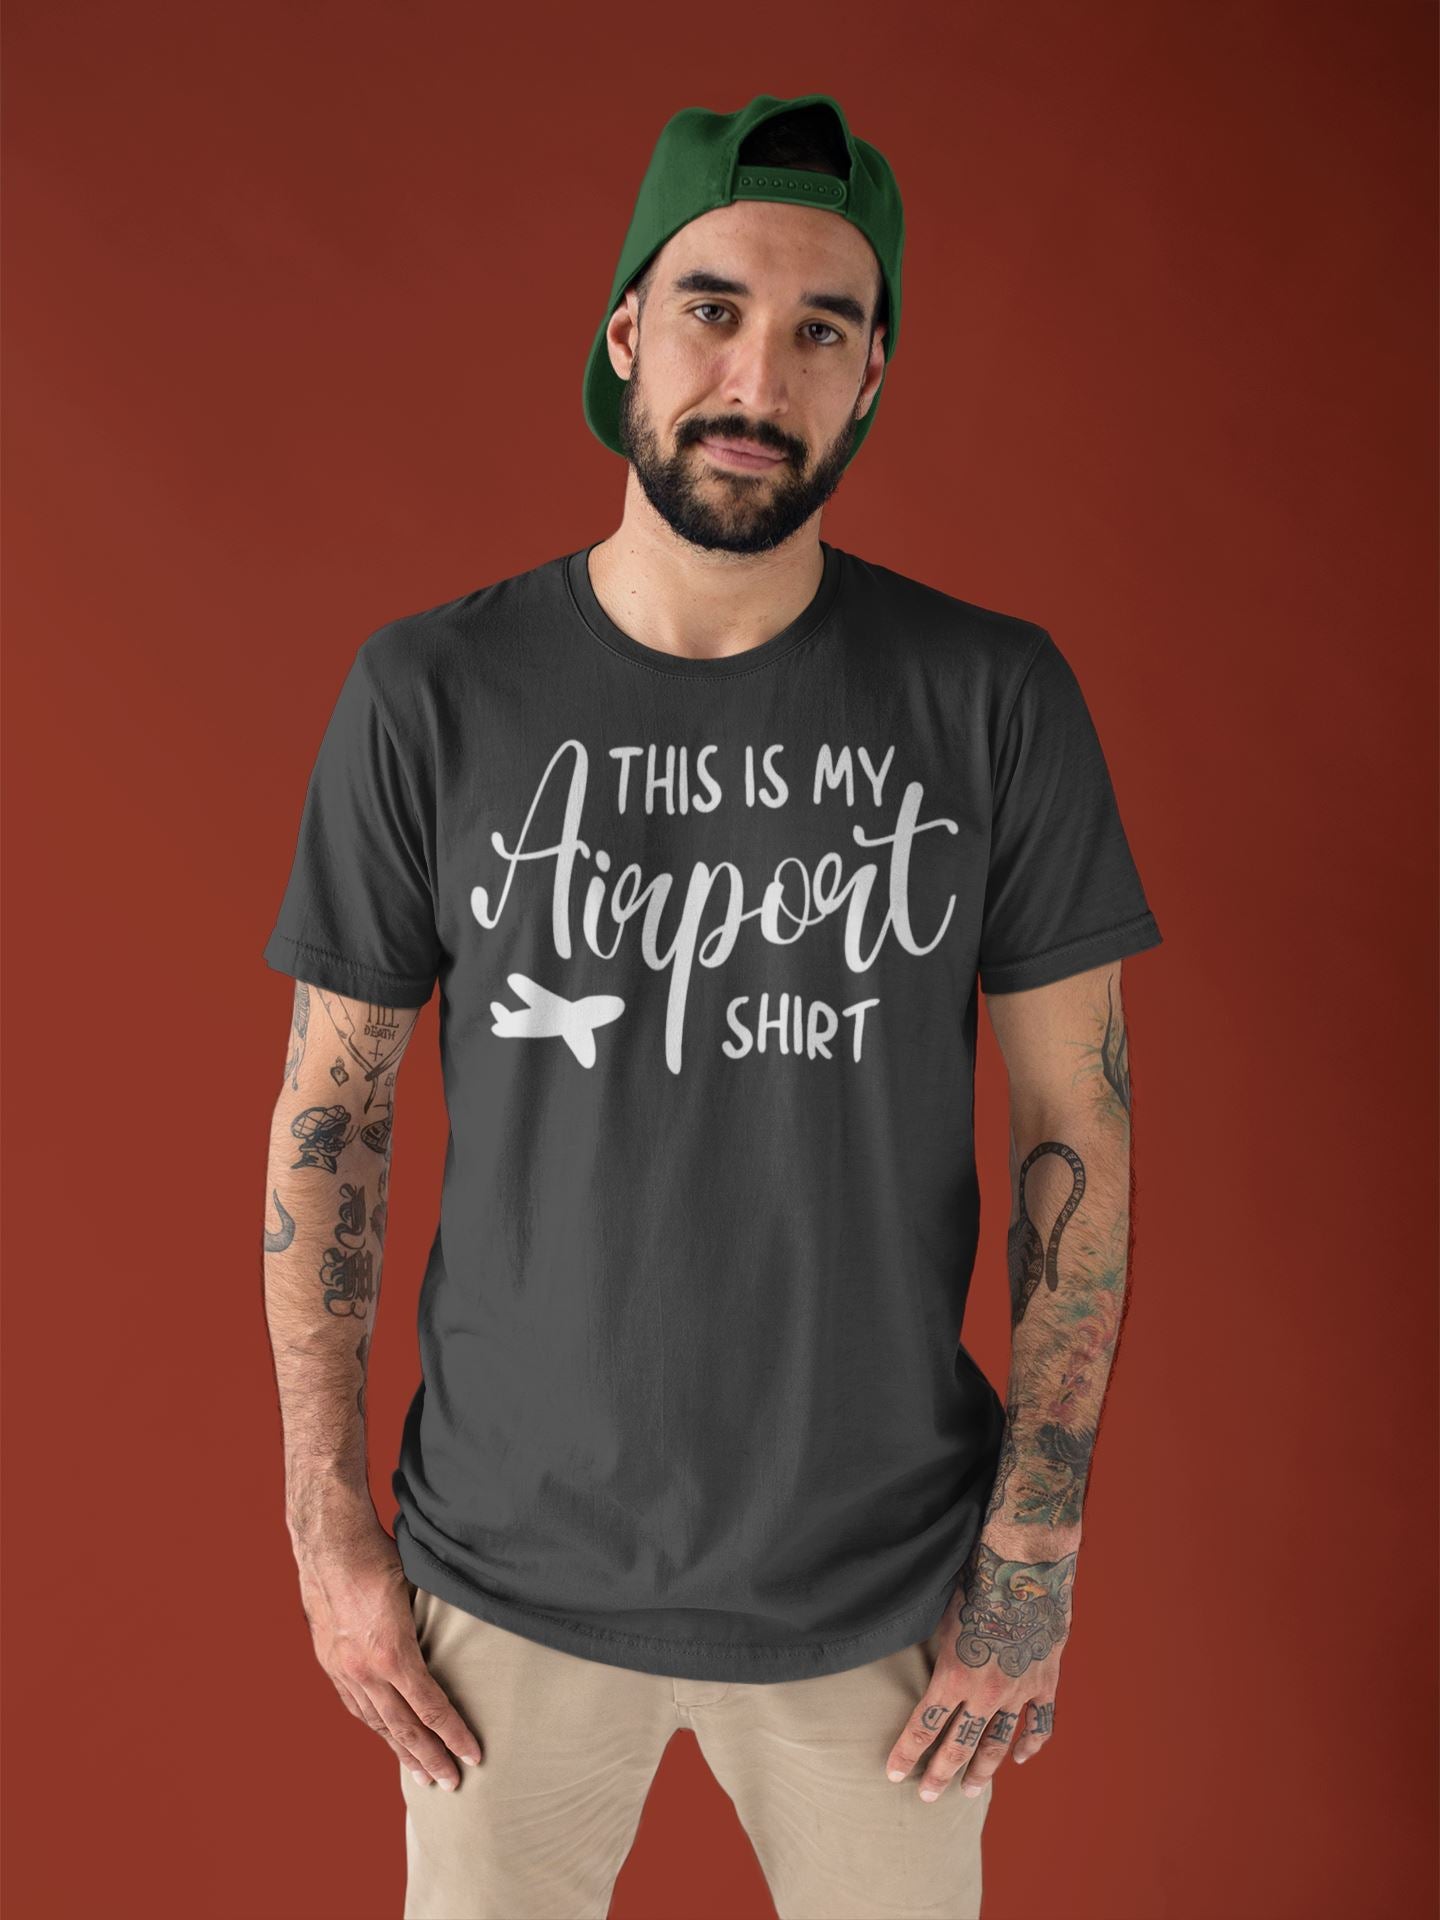 This is My Airport T Shirt Funny Black T Shirt for Men and Women freeshipping - Catch My Drift India